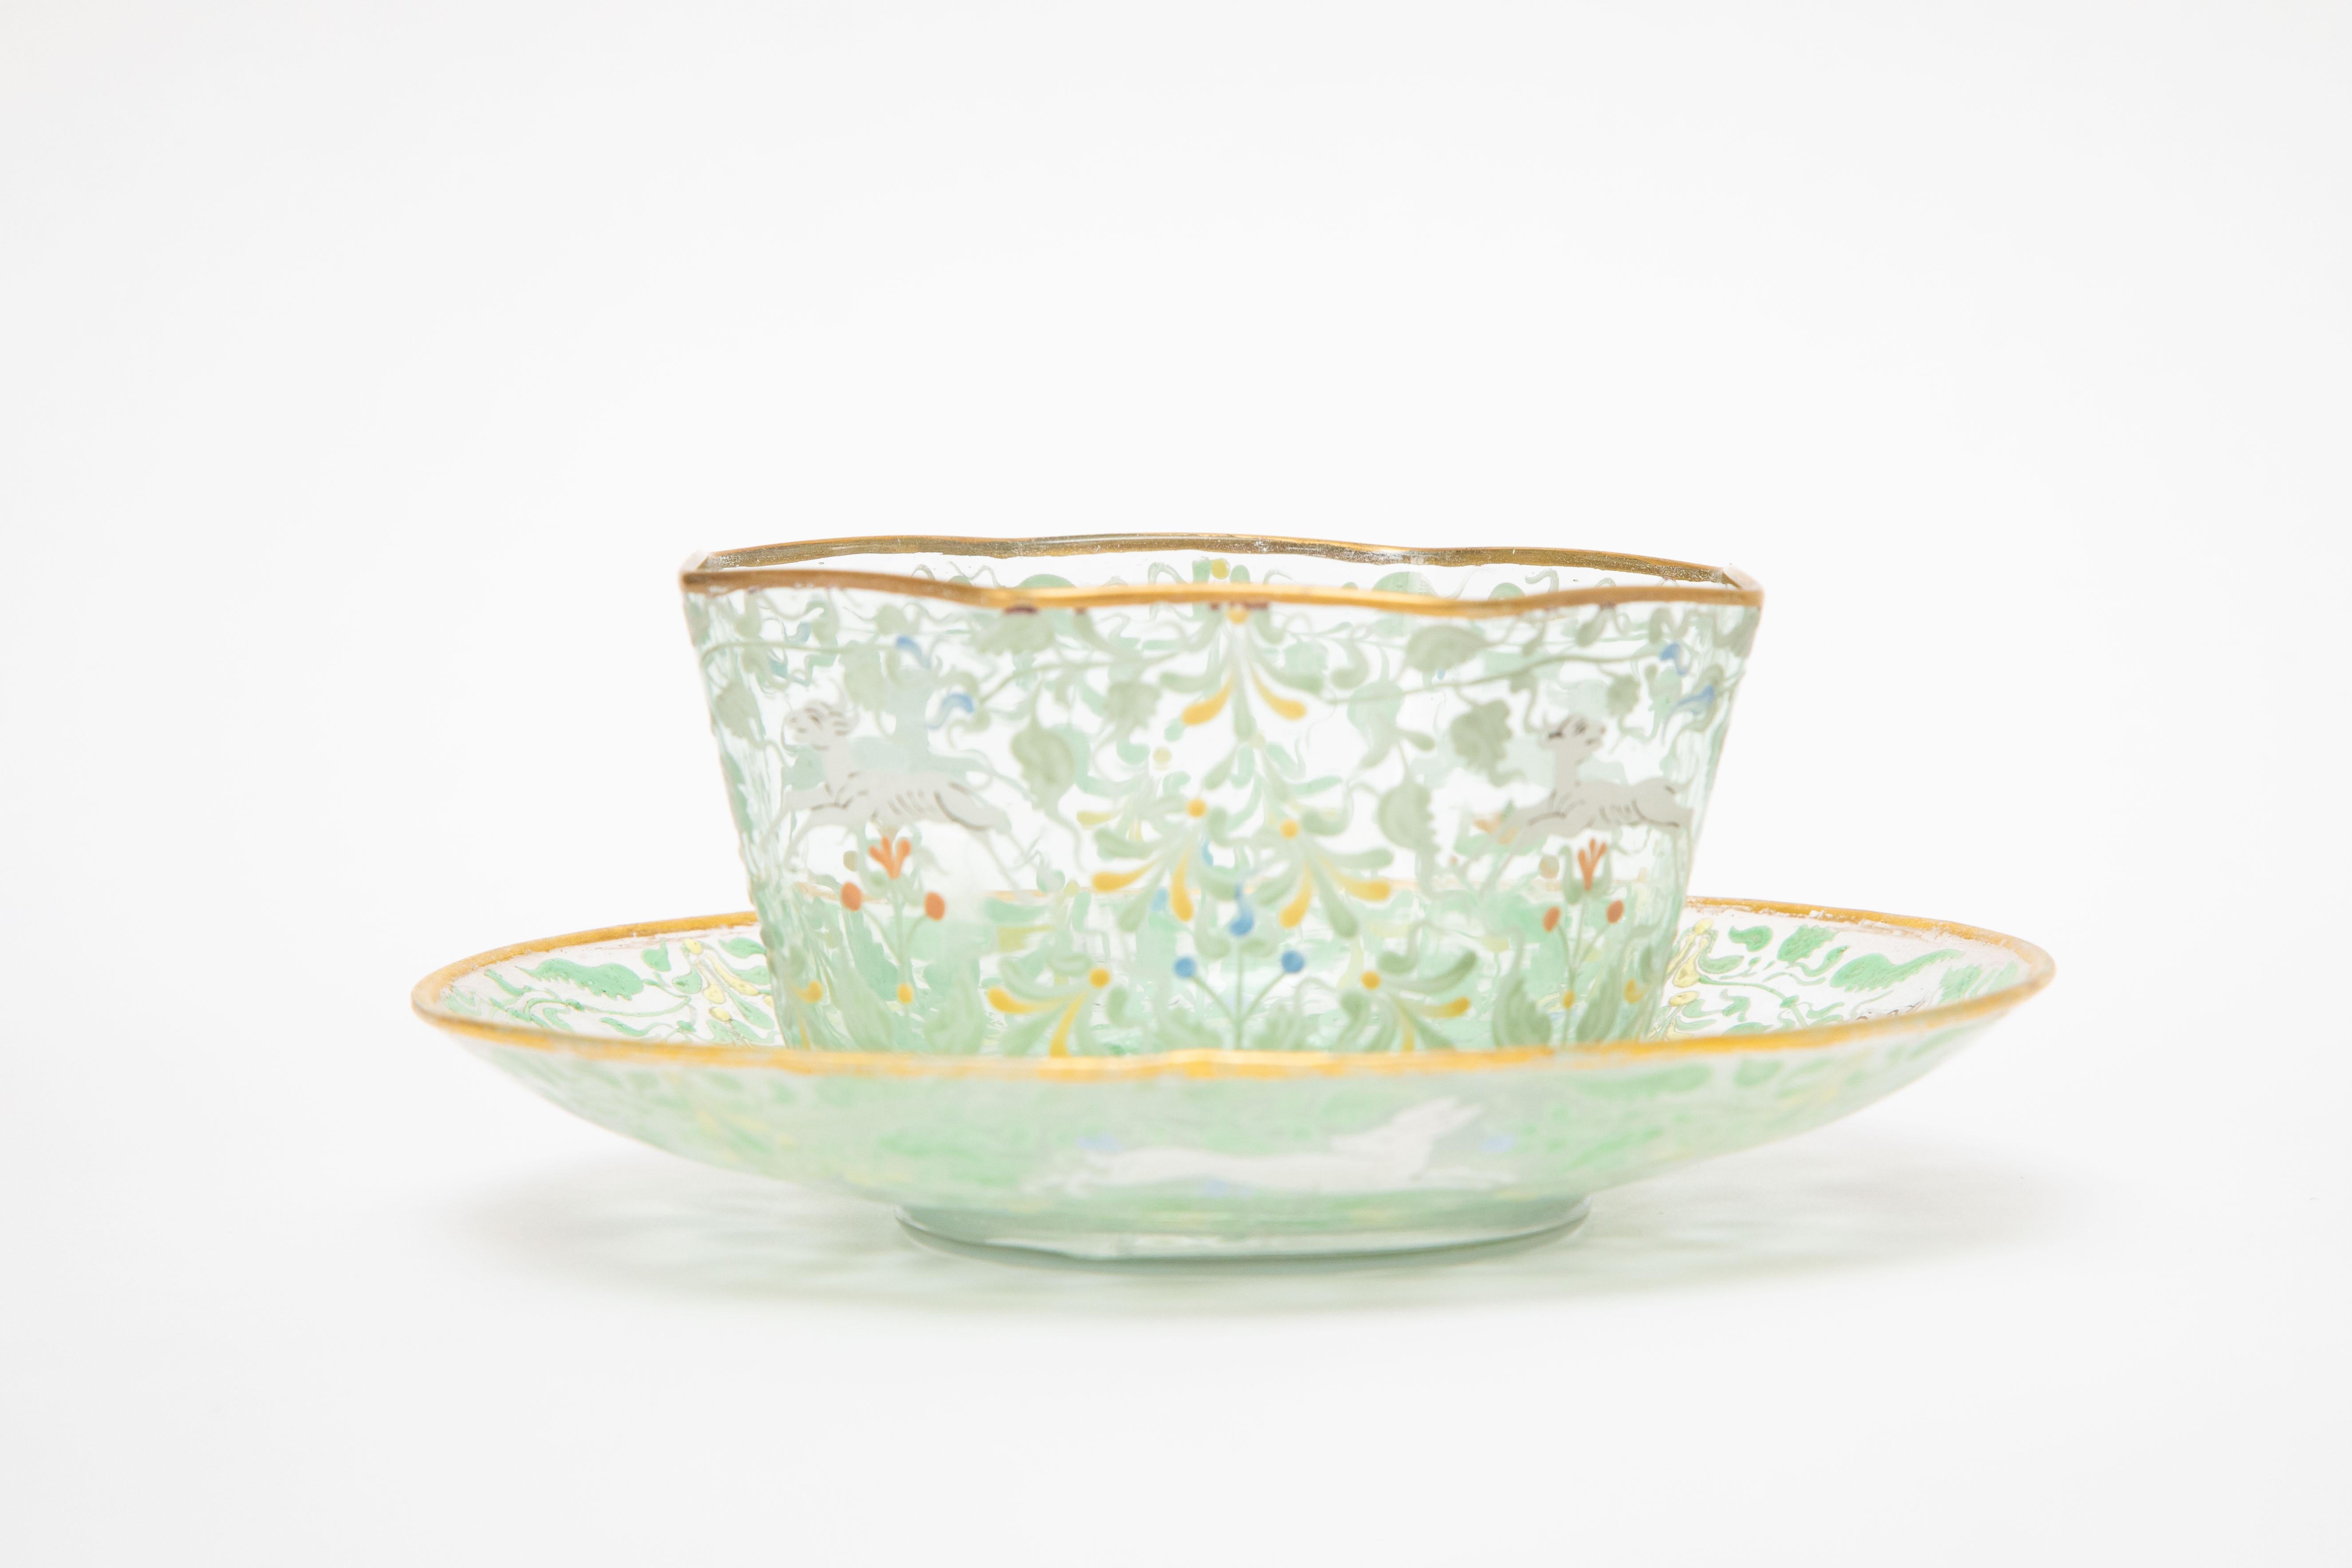 An exquisite set of 12 bowls and 12 under plates from the Venetian art glass island of Murano. This fanciful set has a beautifully blown bowl with very detailed hand painting surround of whimsical flora fauna and animals. A lovely color of pale aqua